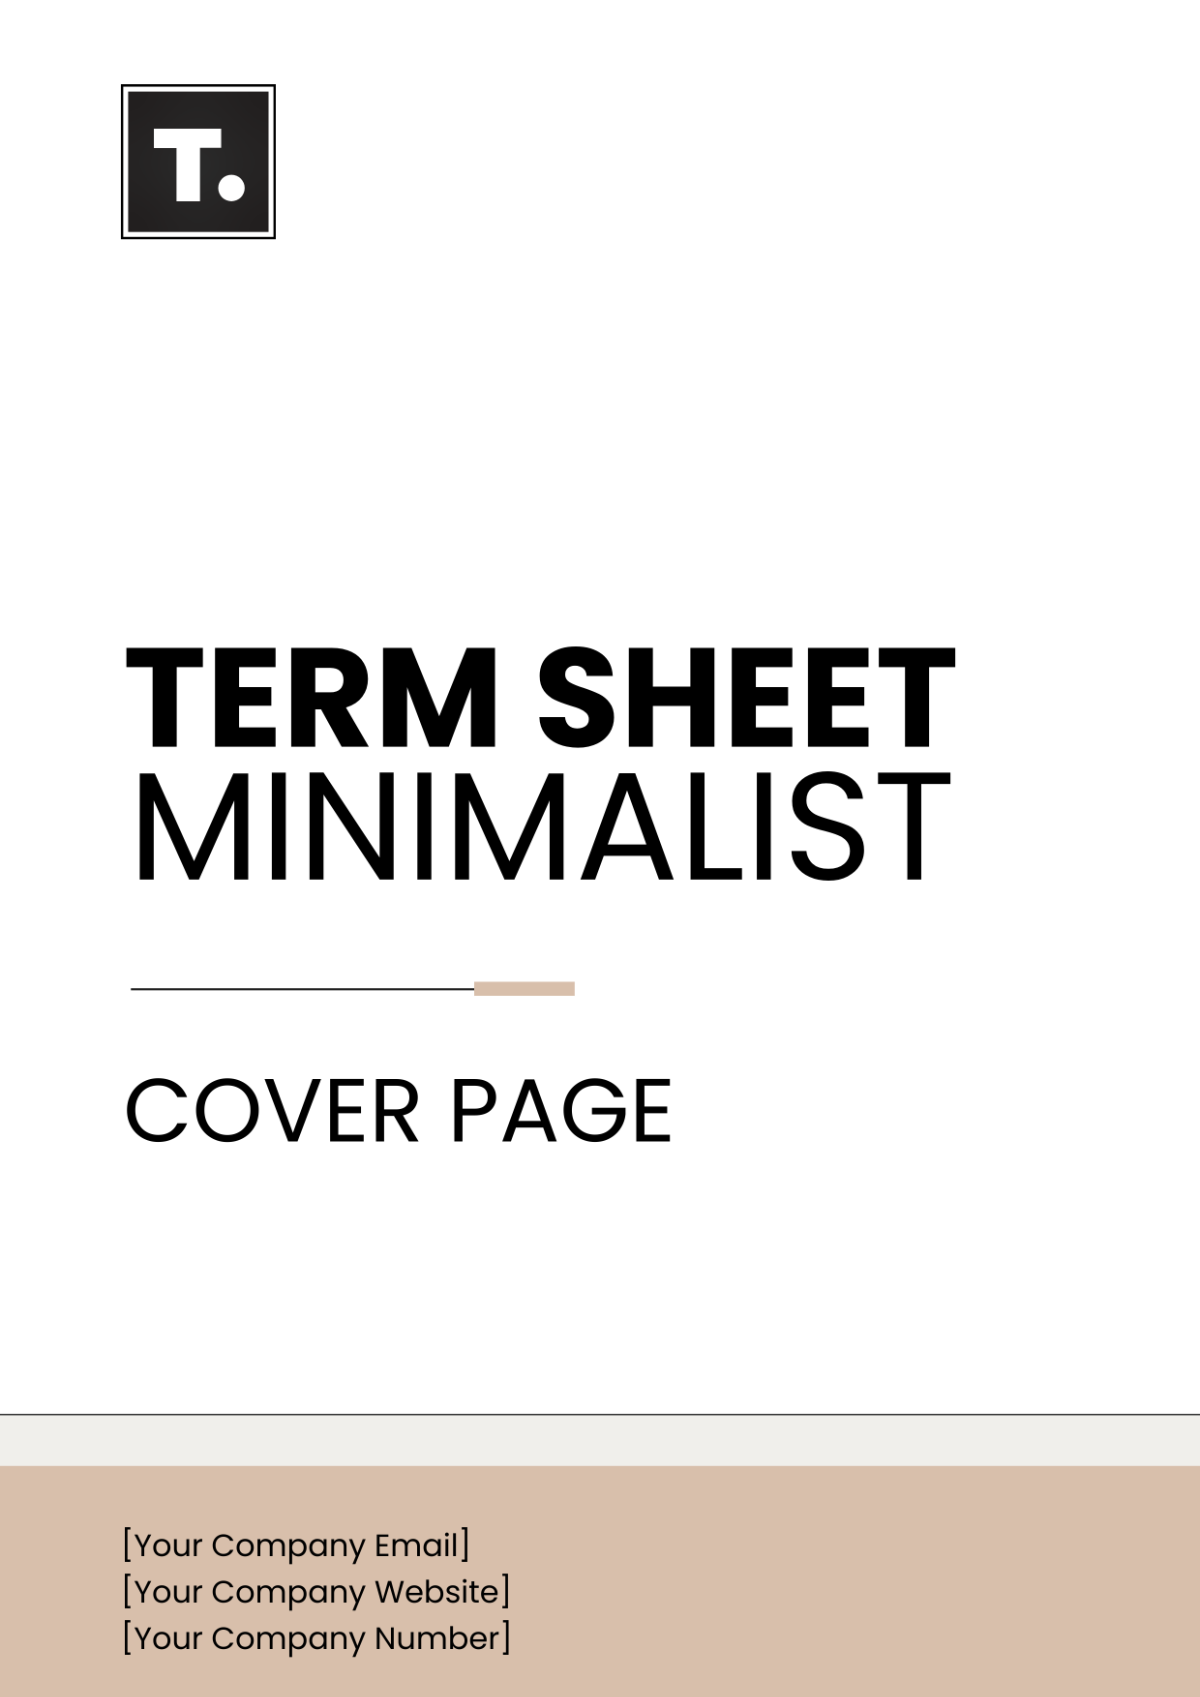 Term Sheet Minimalist Cover Page